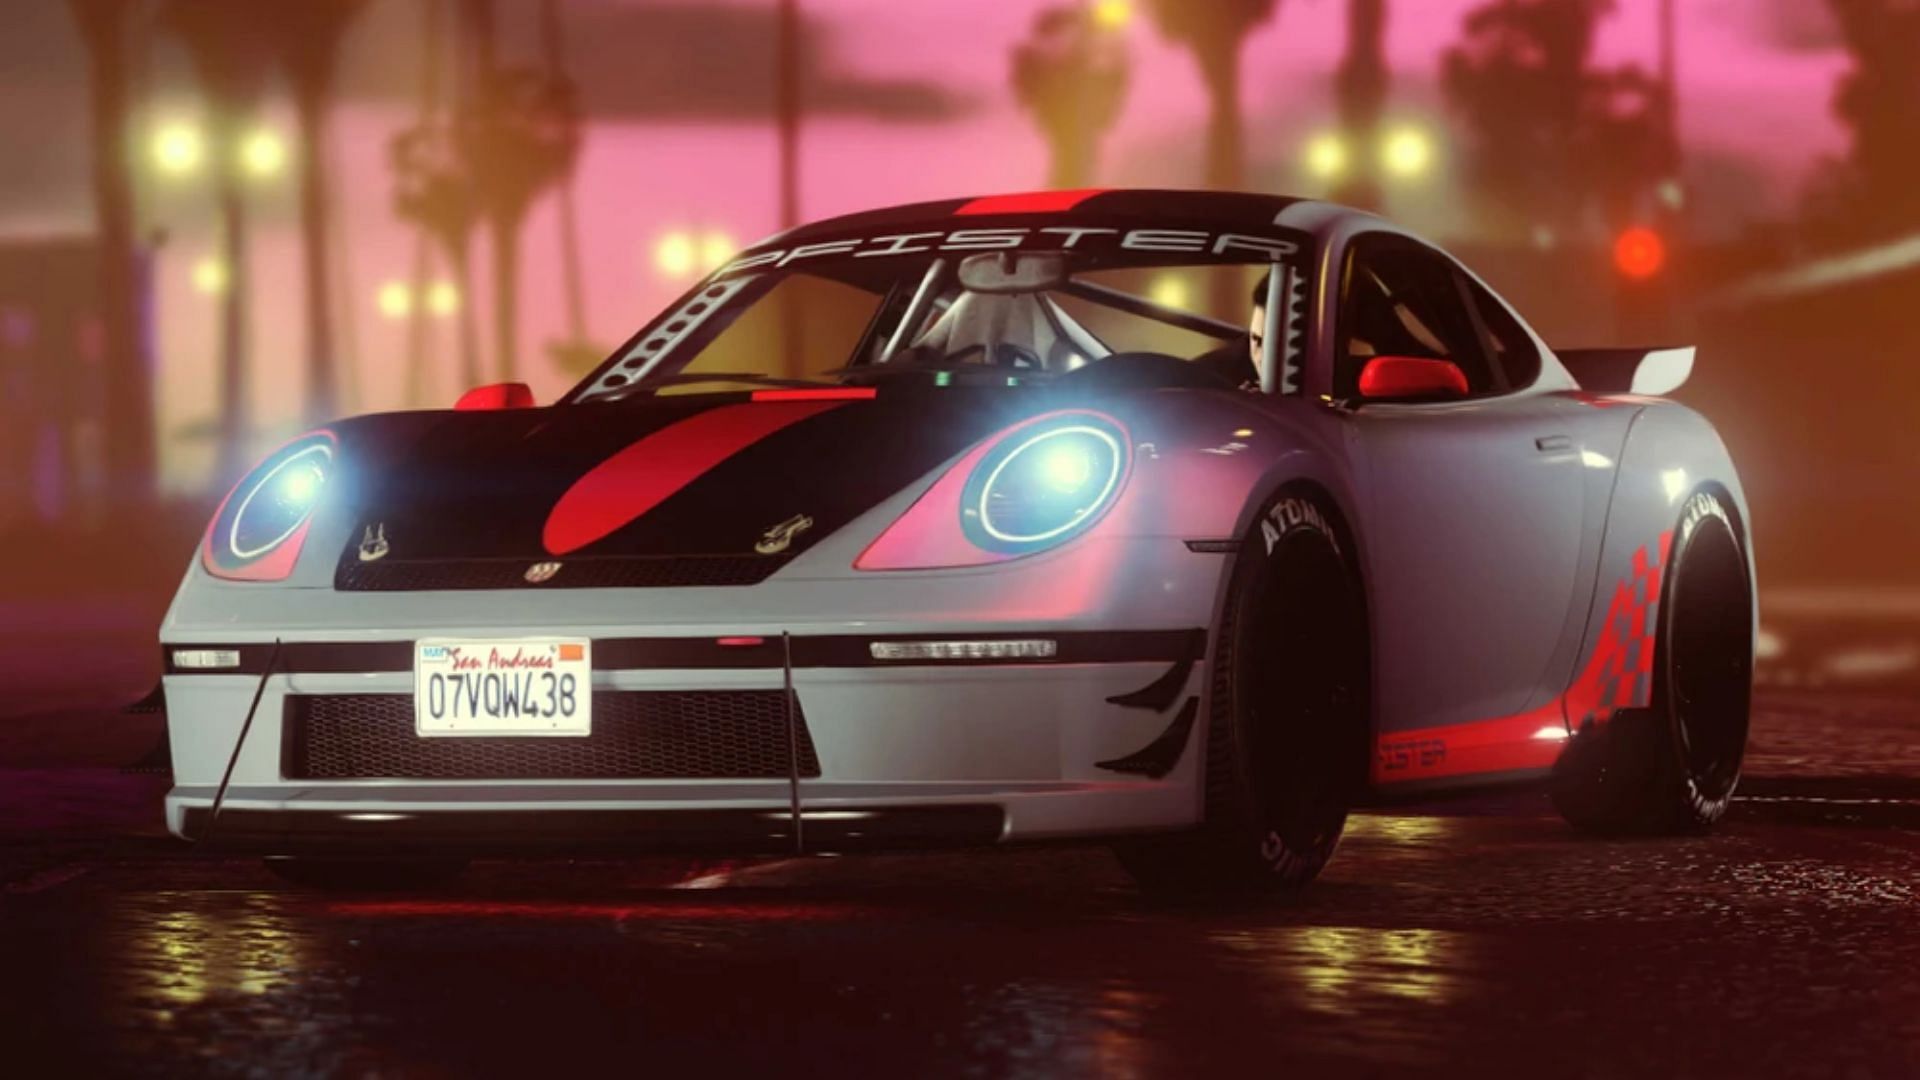 An image of the Comet S2 in Grand Theft Auto Online (Image via Rockstar Games)